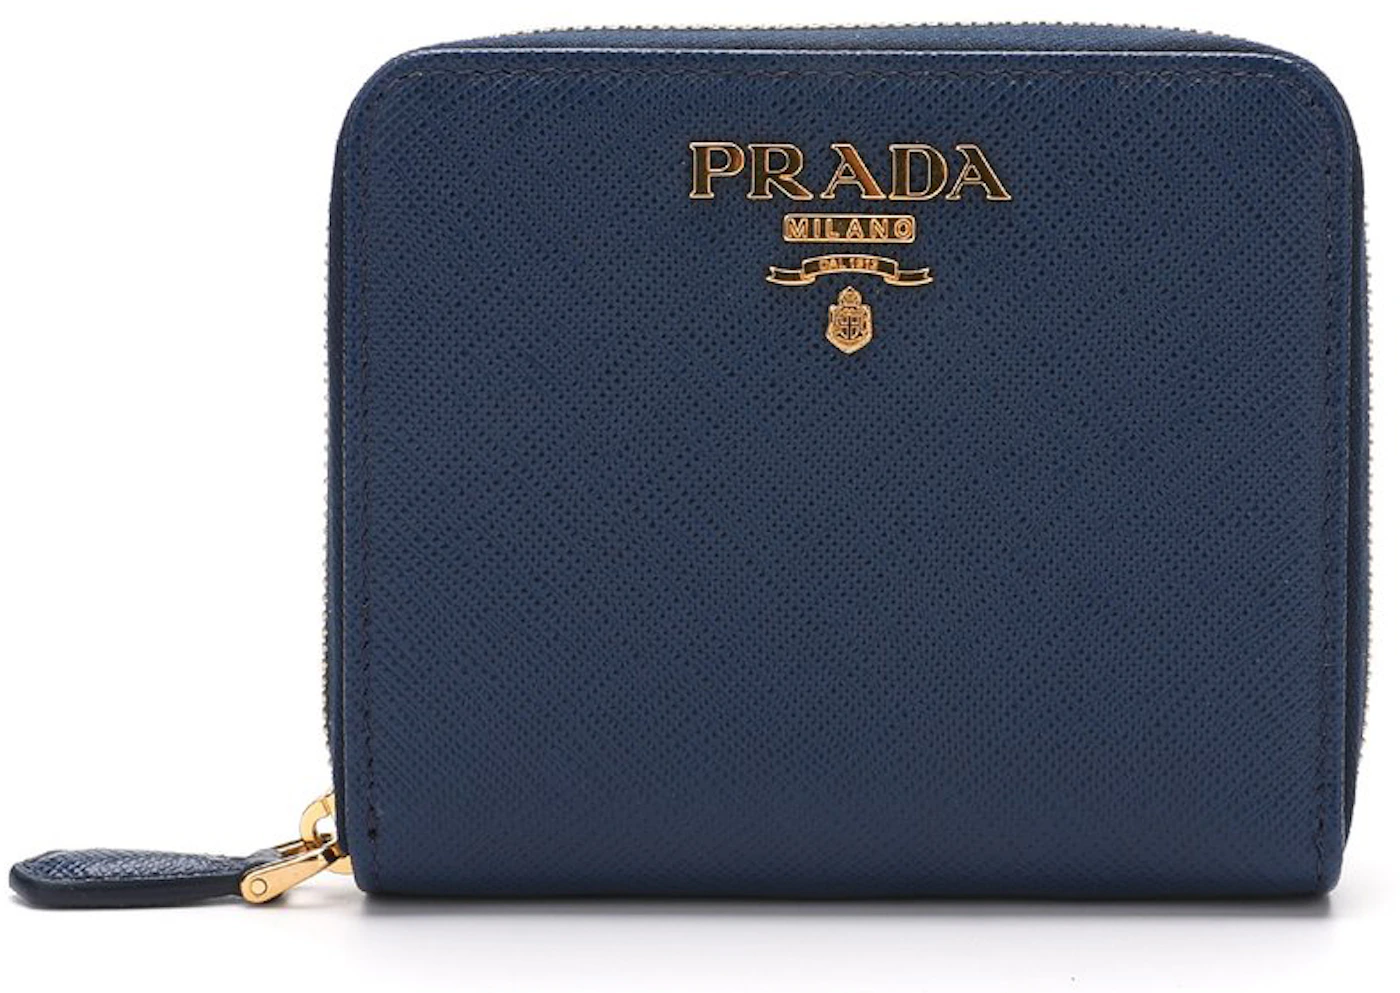 Prada Women's Black Saffiano Leather Large Flap Wallet | by Mitchell Stores